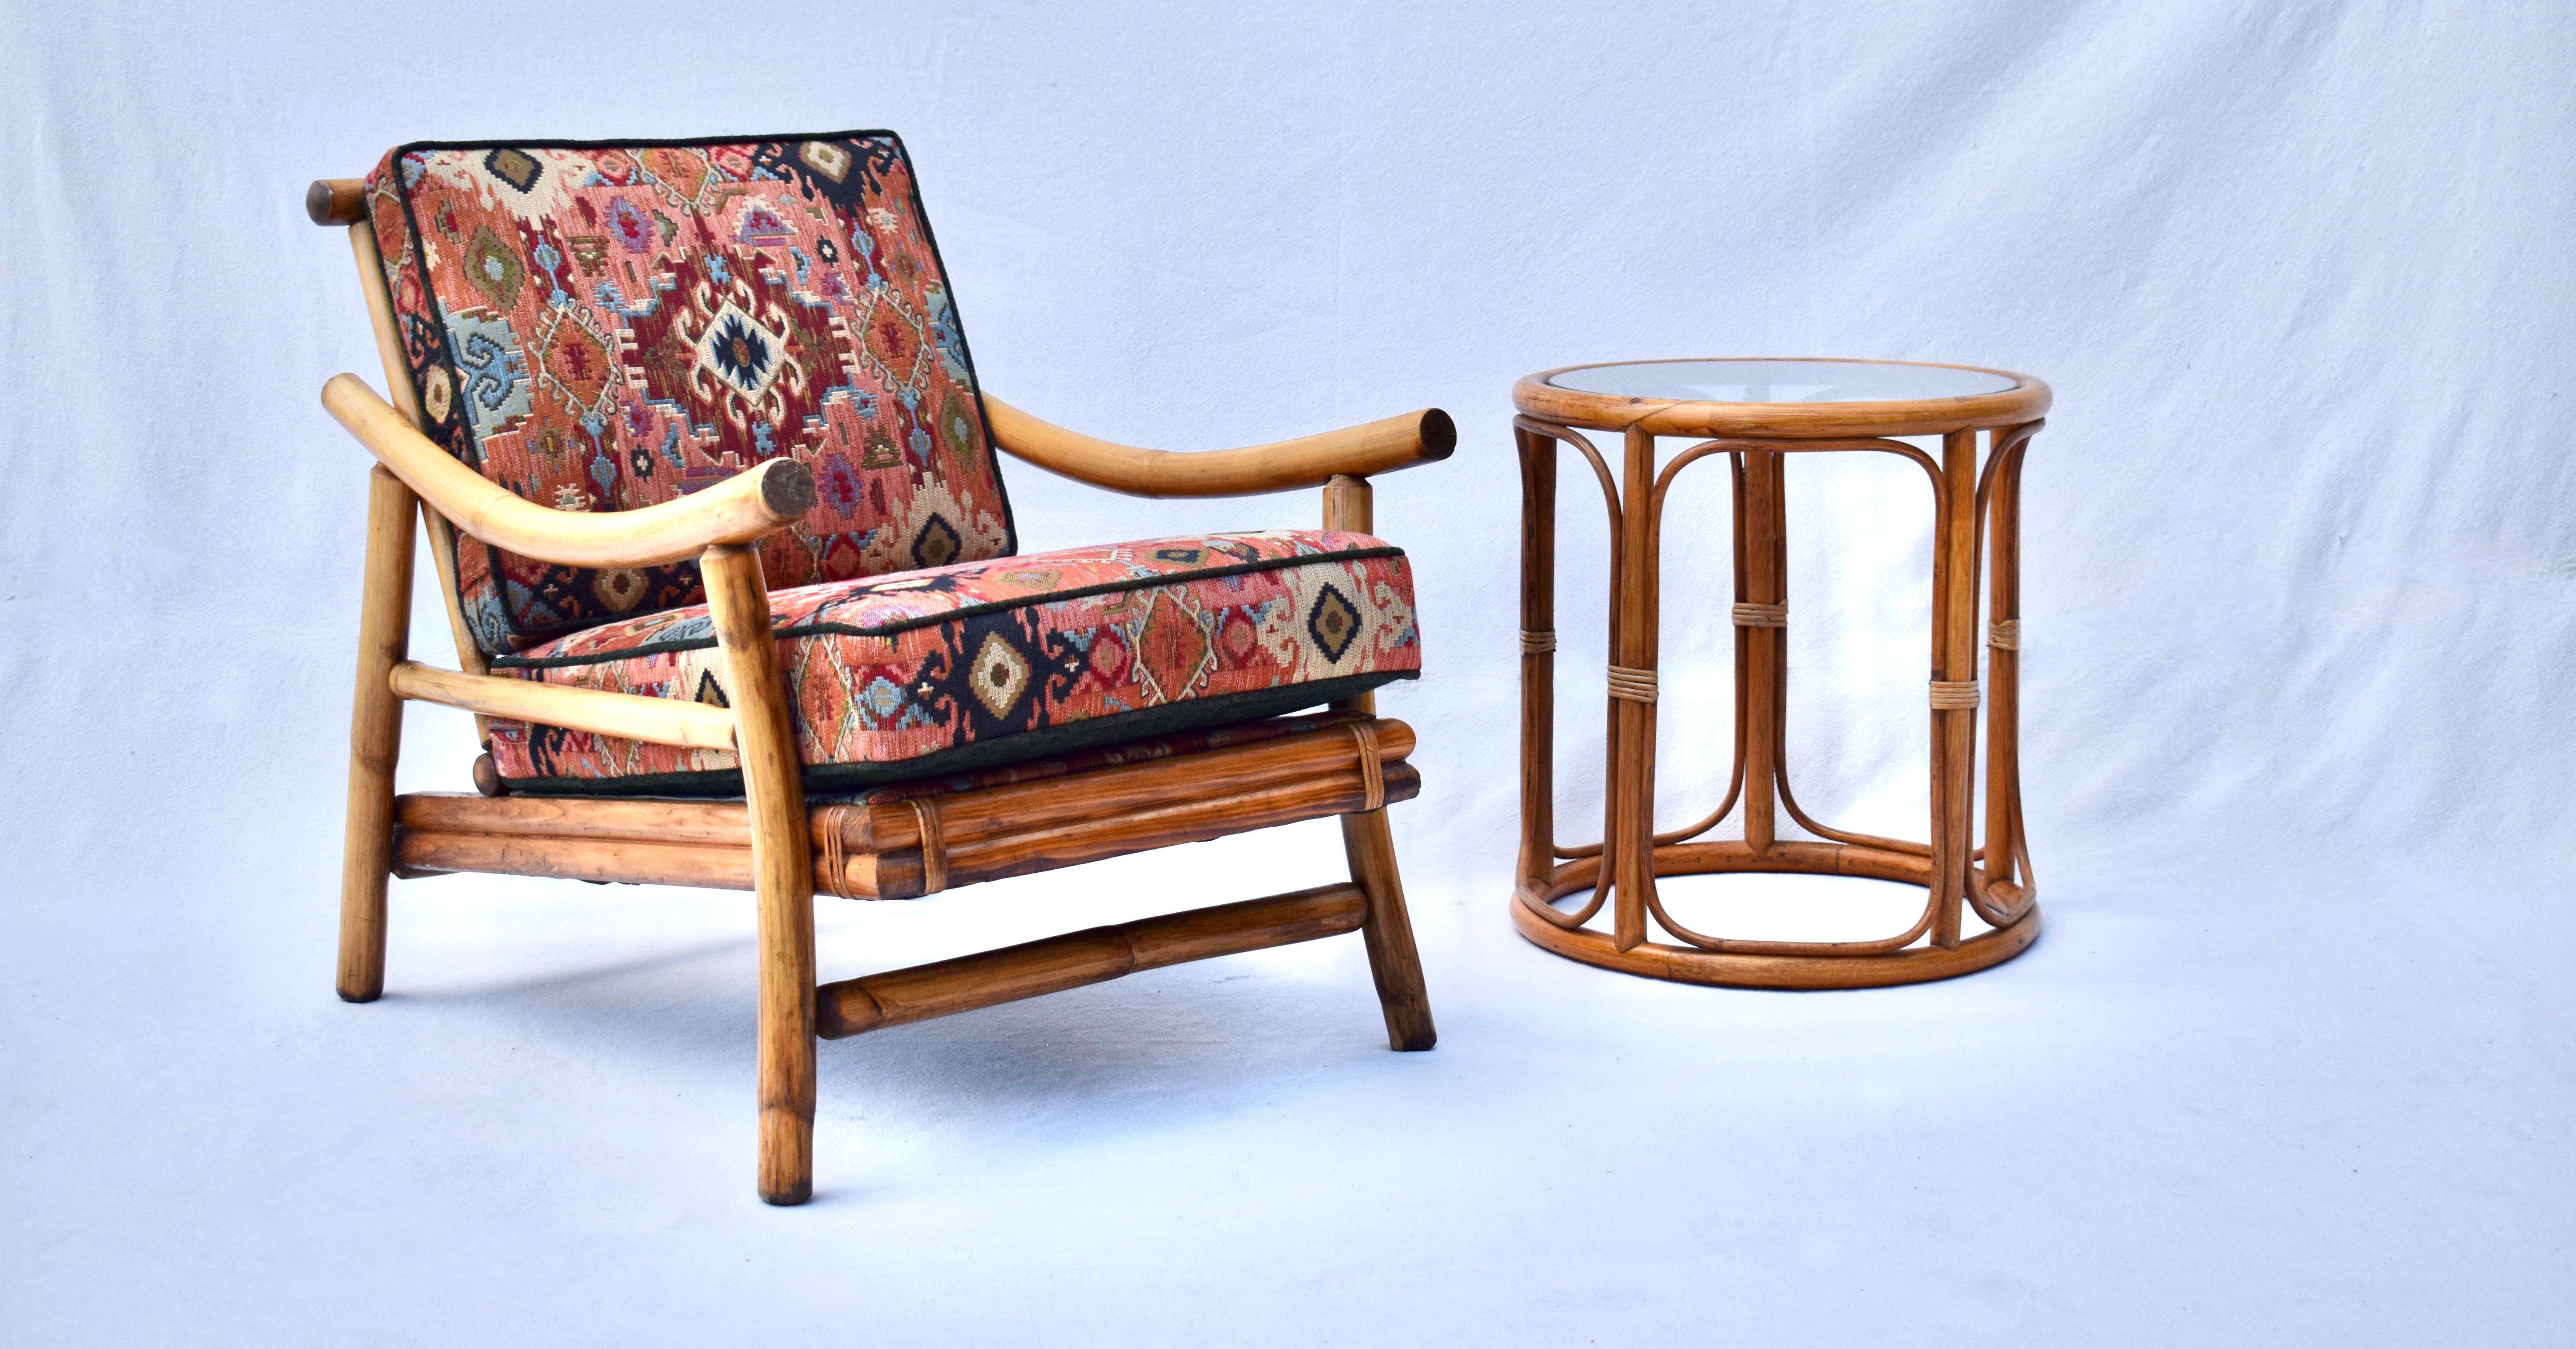 Ficks Reed Pagoda Rattan Chairs & Table Set For Sale 2